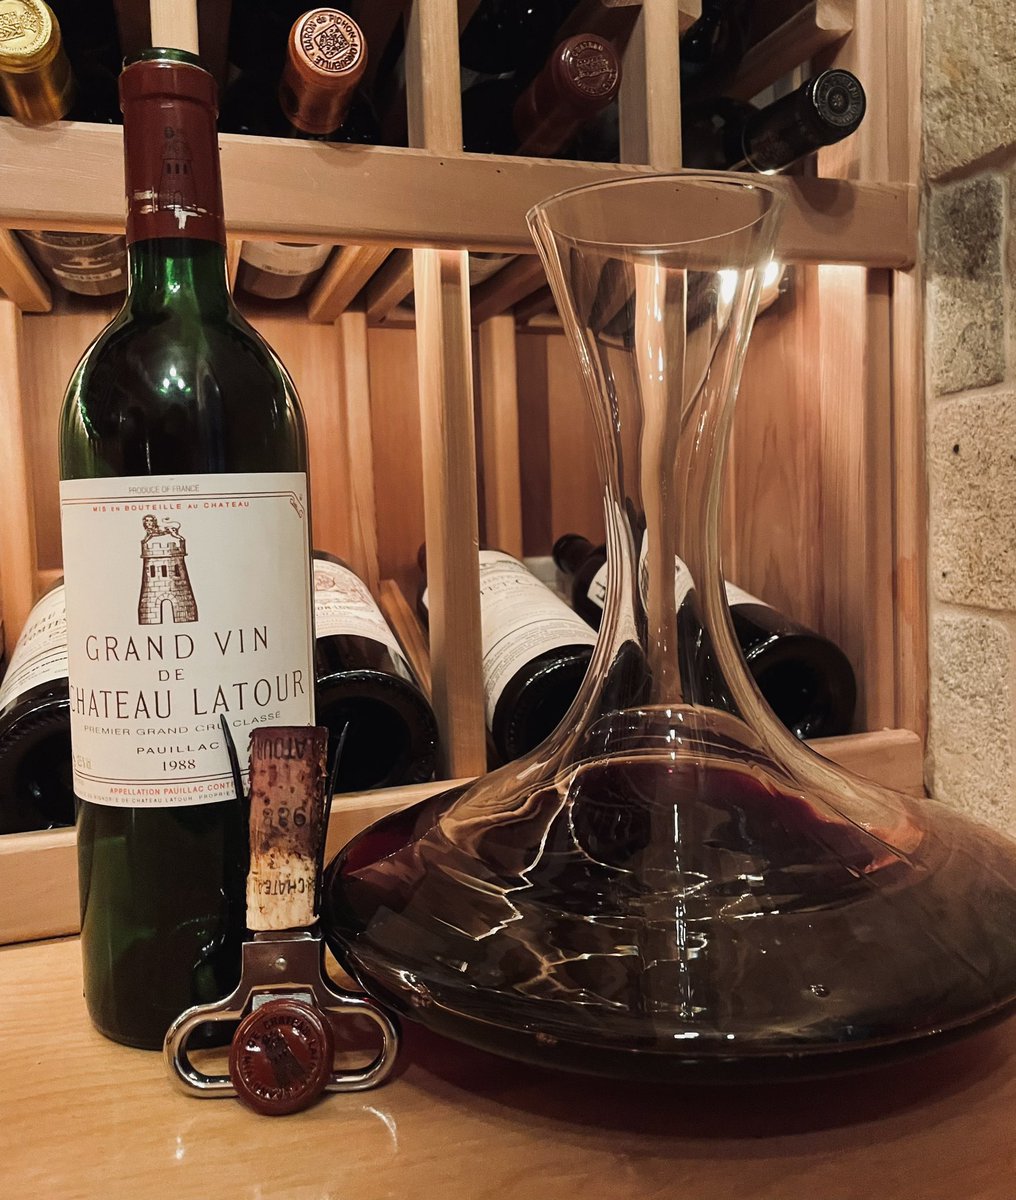 At 36 years of age, this 1988 Chateau #Latour is still bringing great enjoyment. #Bordeaux #Pauillac #Wine